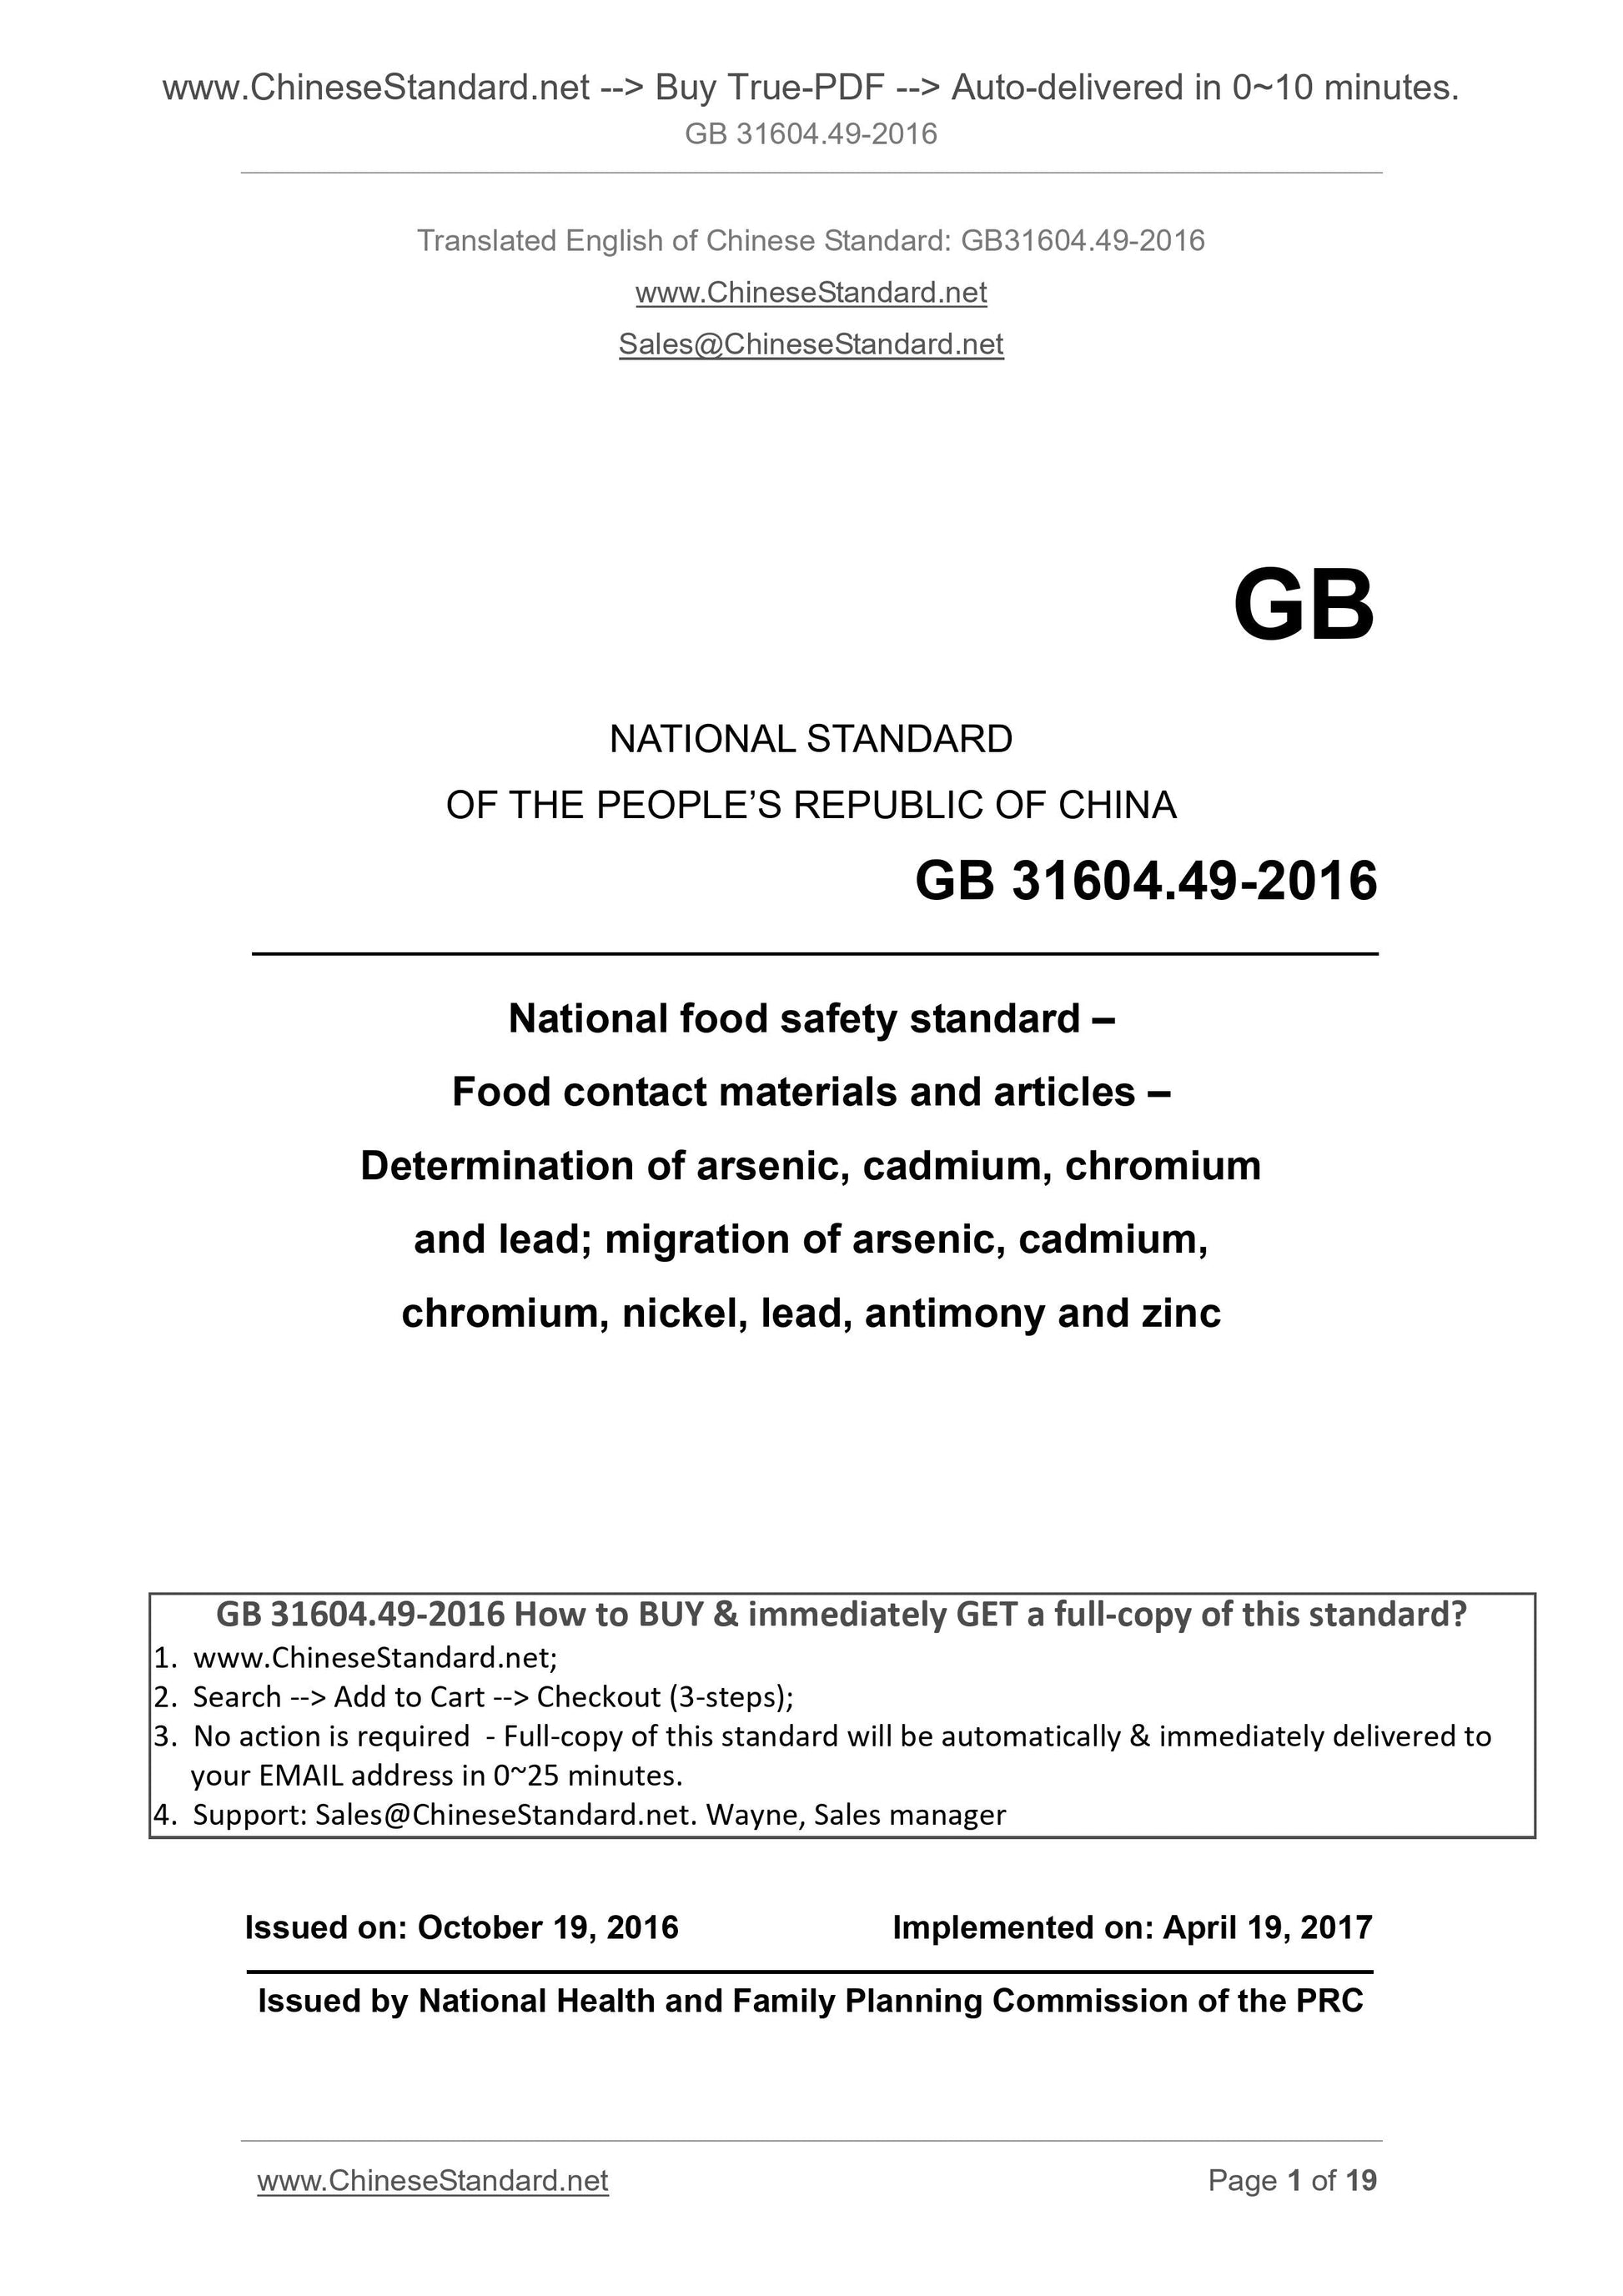 GB 31604.49-2016 Page 1